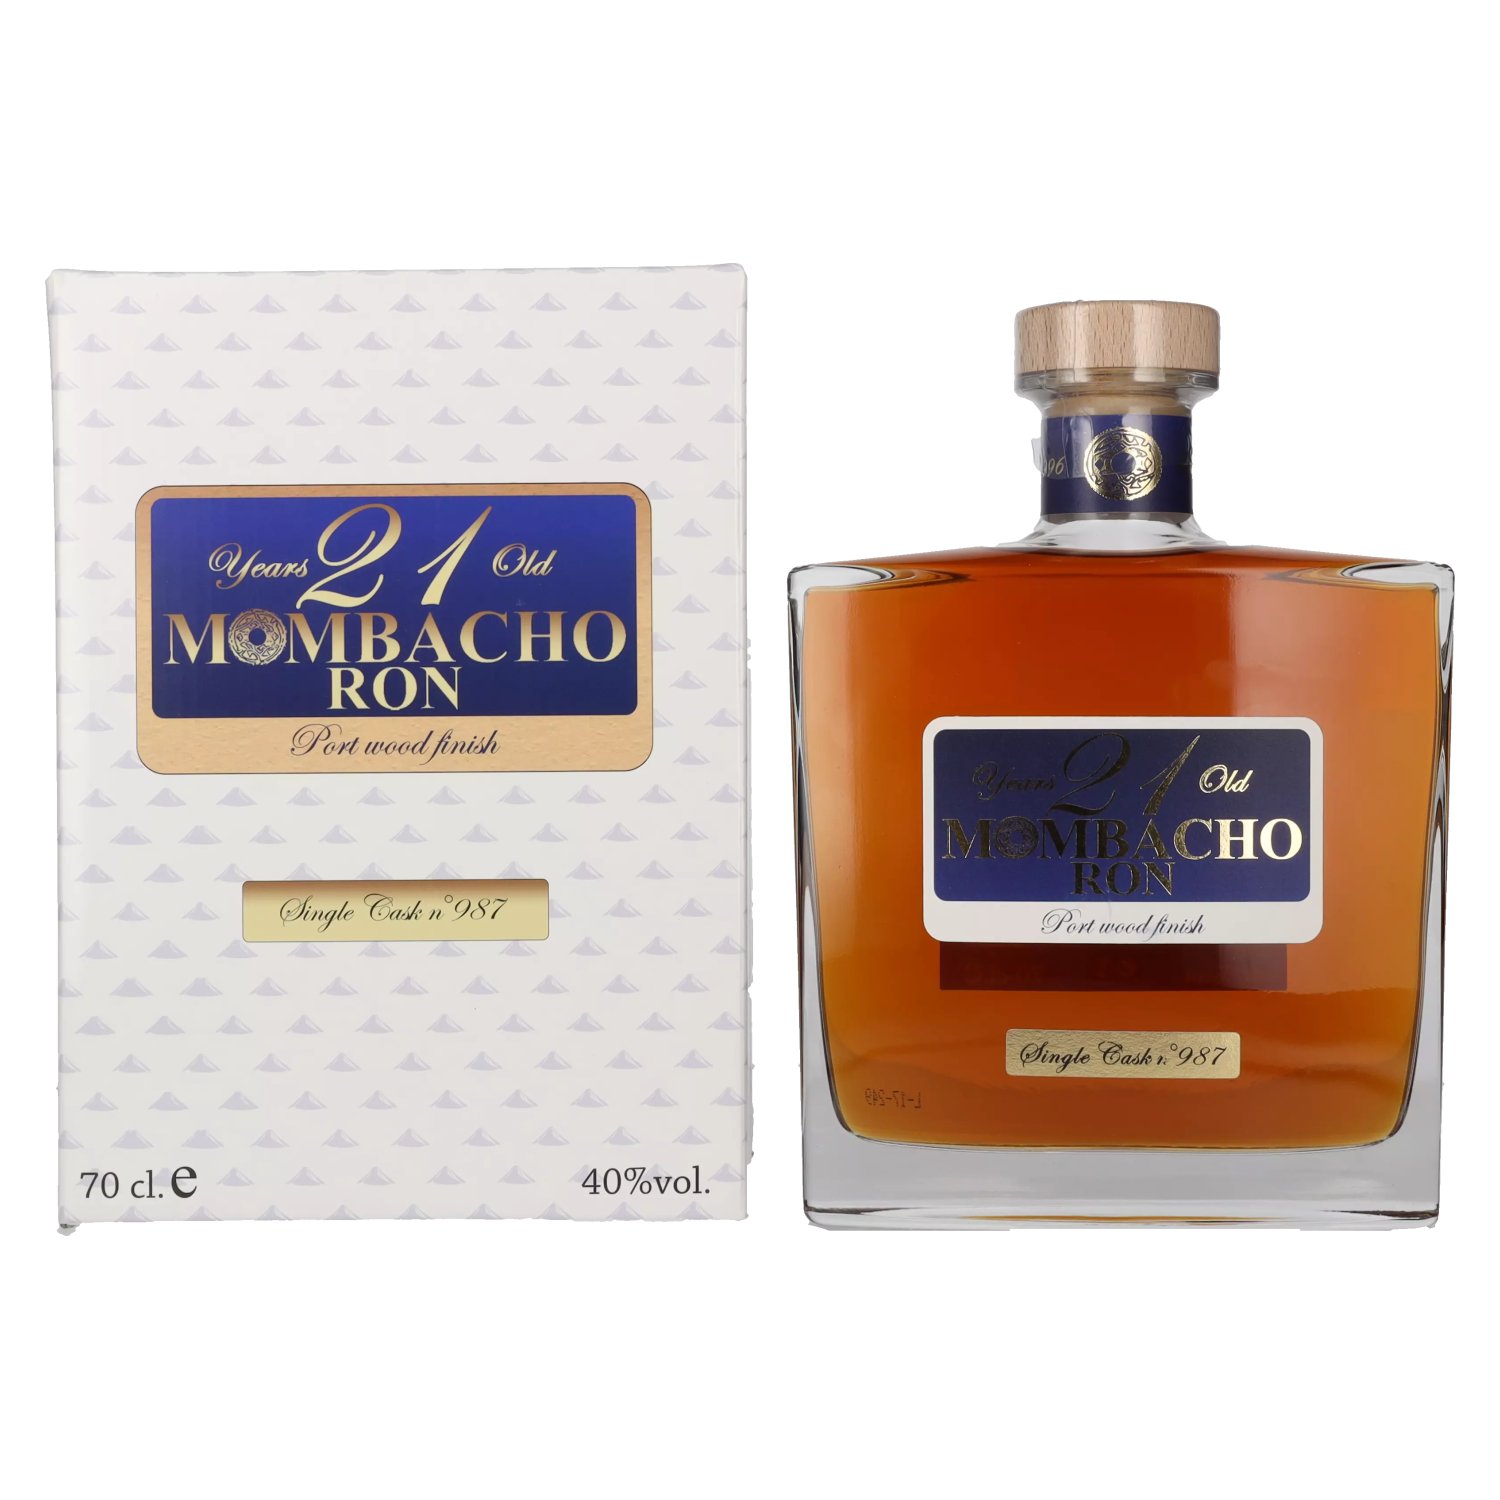 Mombacho Wood 0,7l Years Port Old in 40% Ron Vol. Giftbox 21 Finish